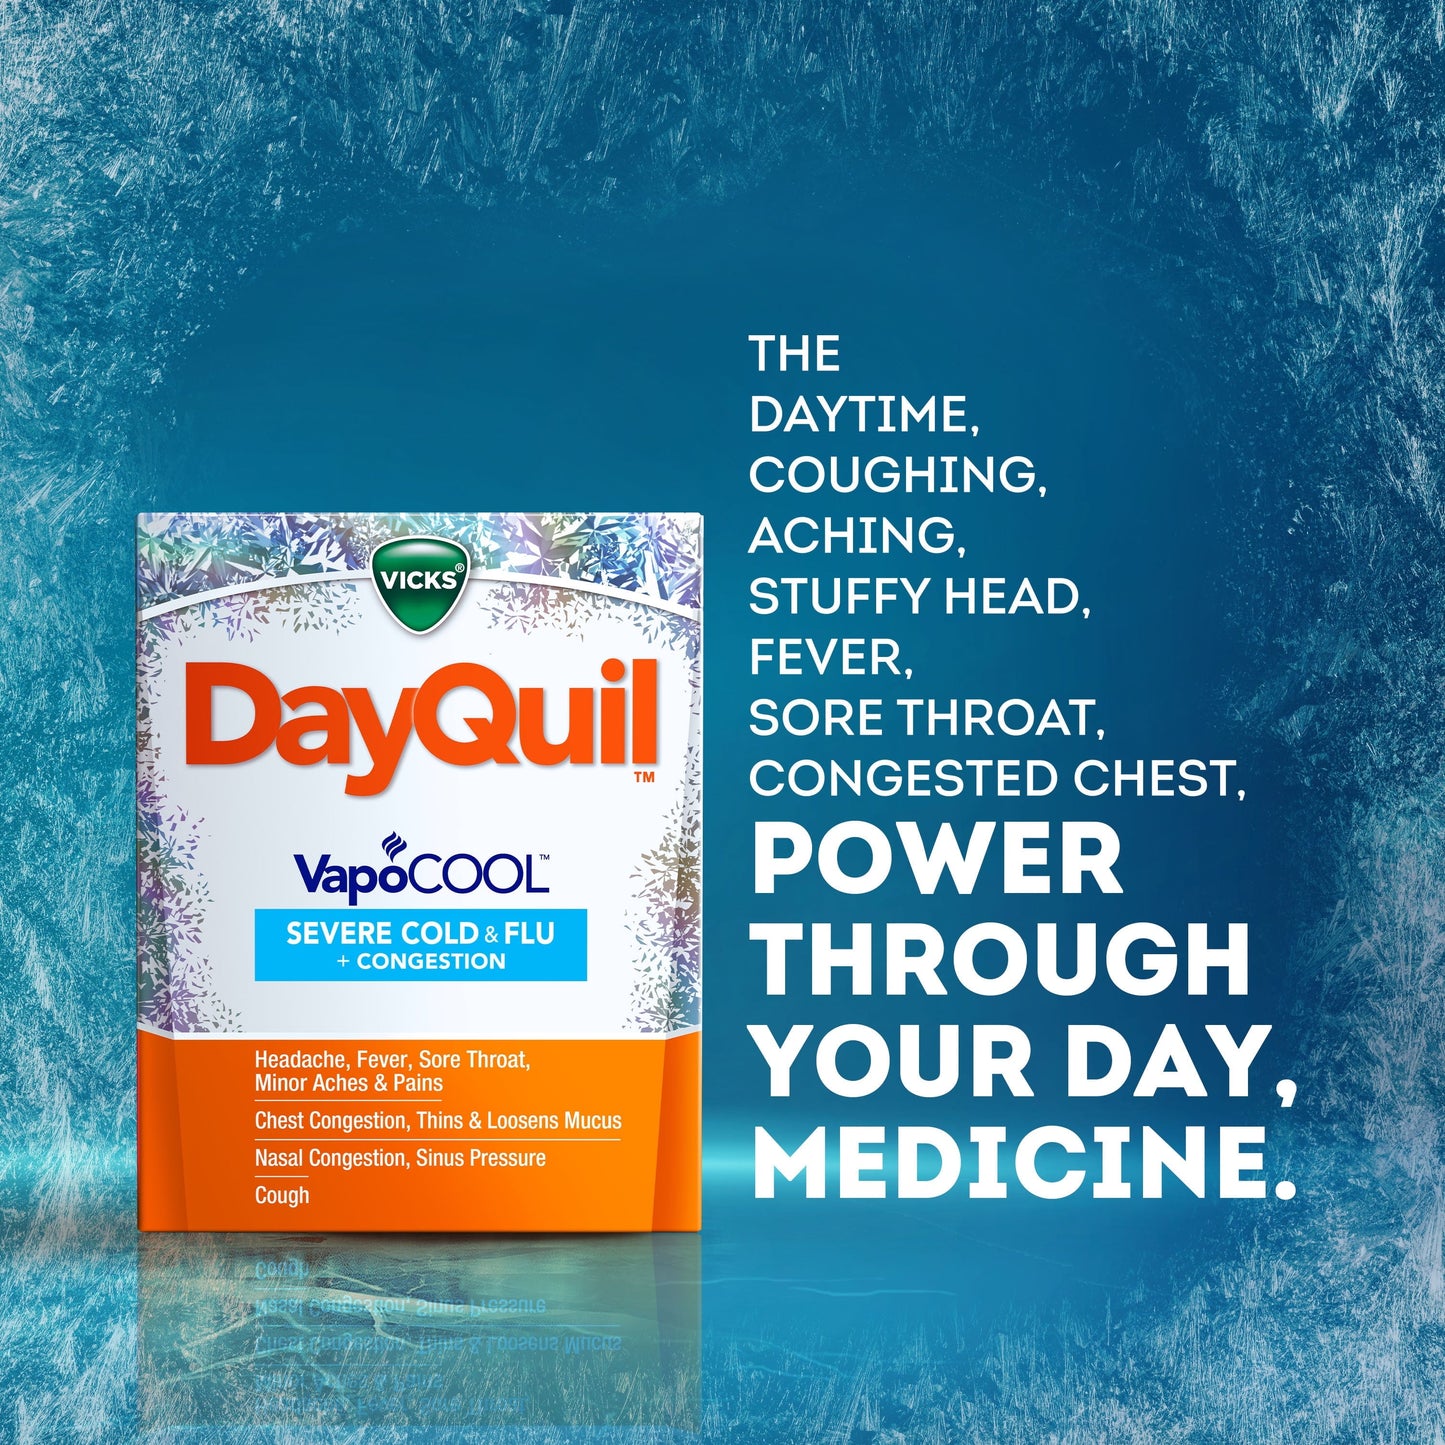 Vicks DayQuil & NyQuil Vapocool Caplets, Severe Cold & Flu Relief, over-the-counter Medicine, 24 Ct